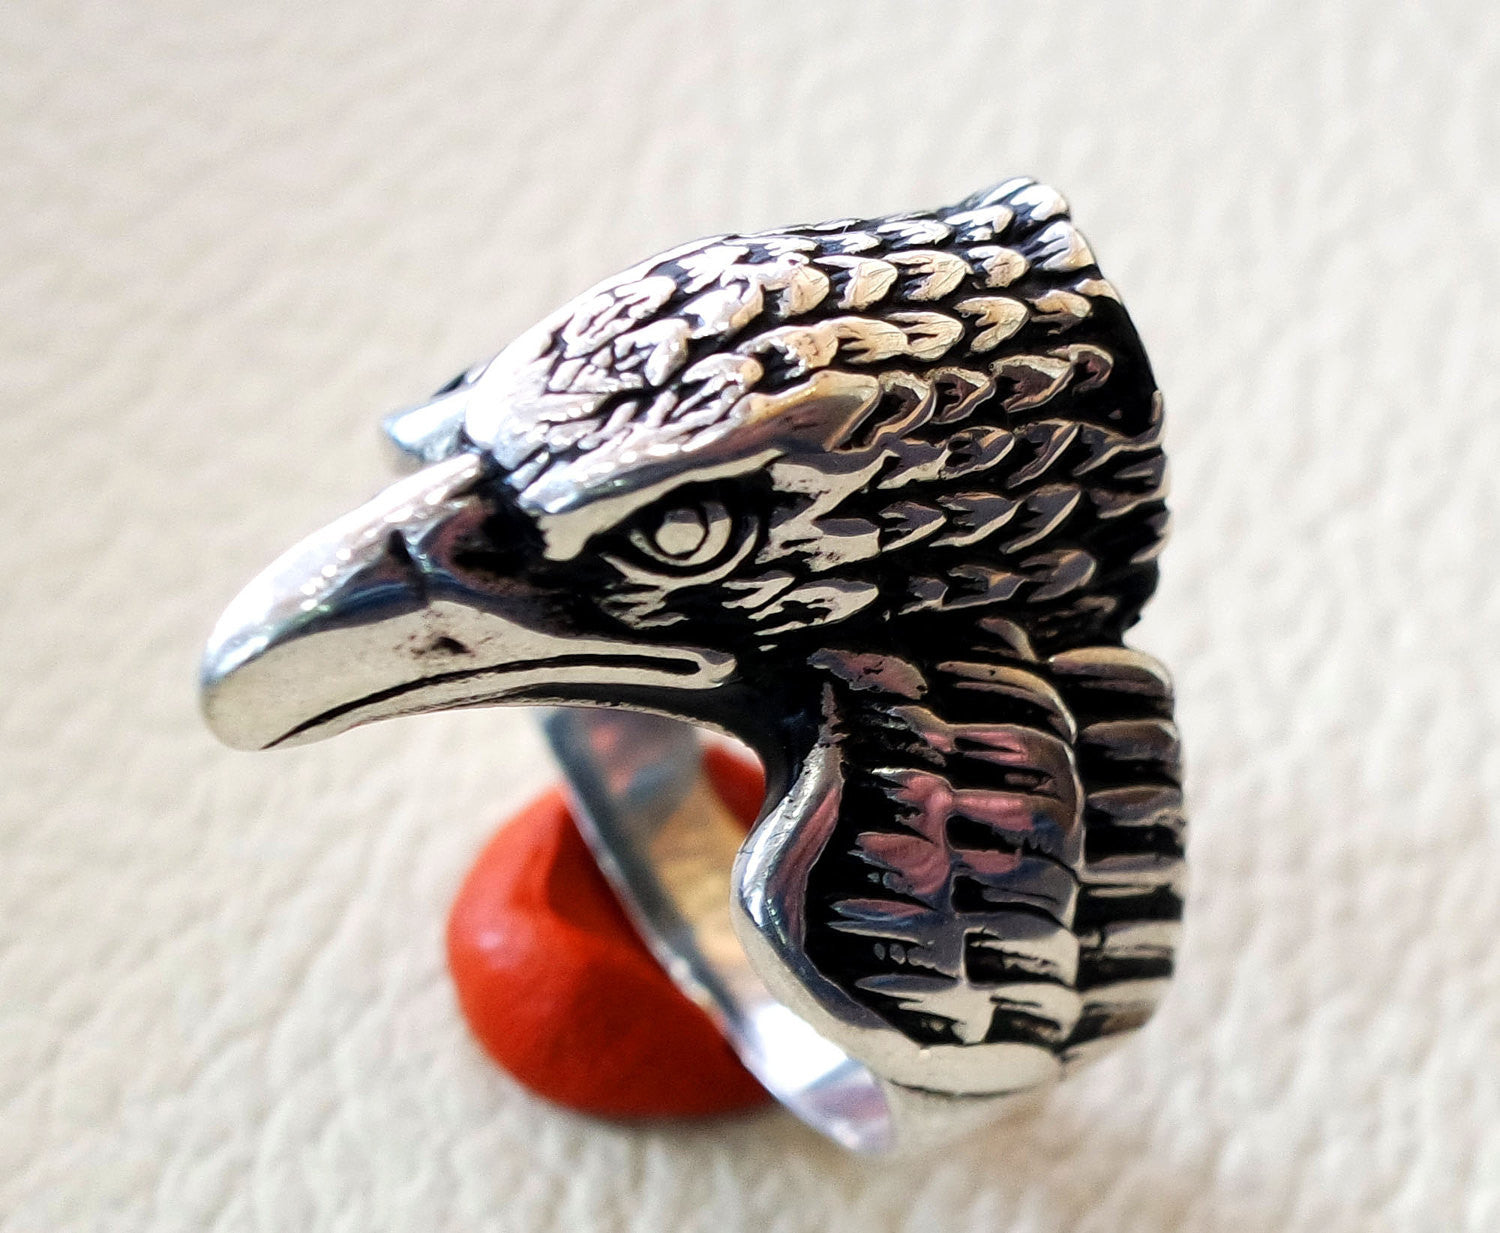 eagle falcon ring heavy sterling silver 925 man biker ring all sizes handmade animal head jewelry fast shipping detailed craftsmanship